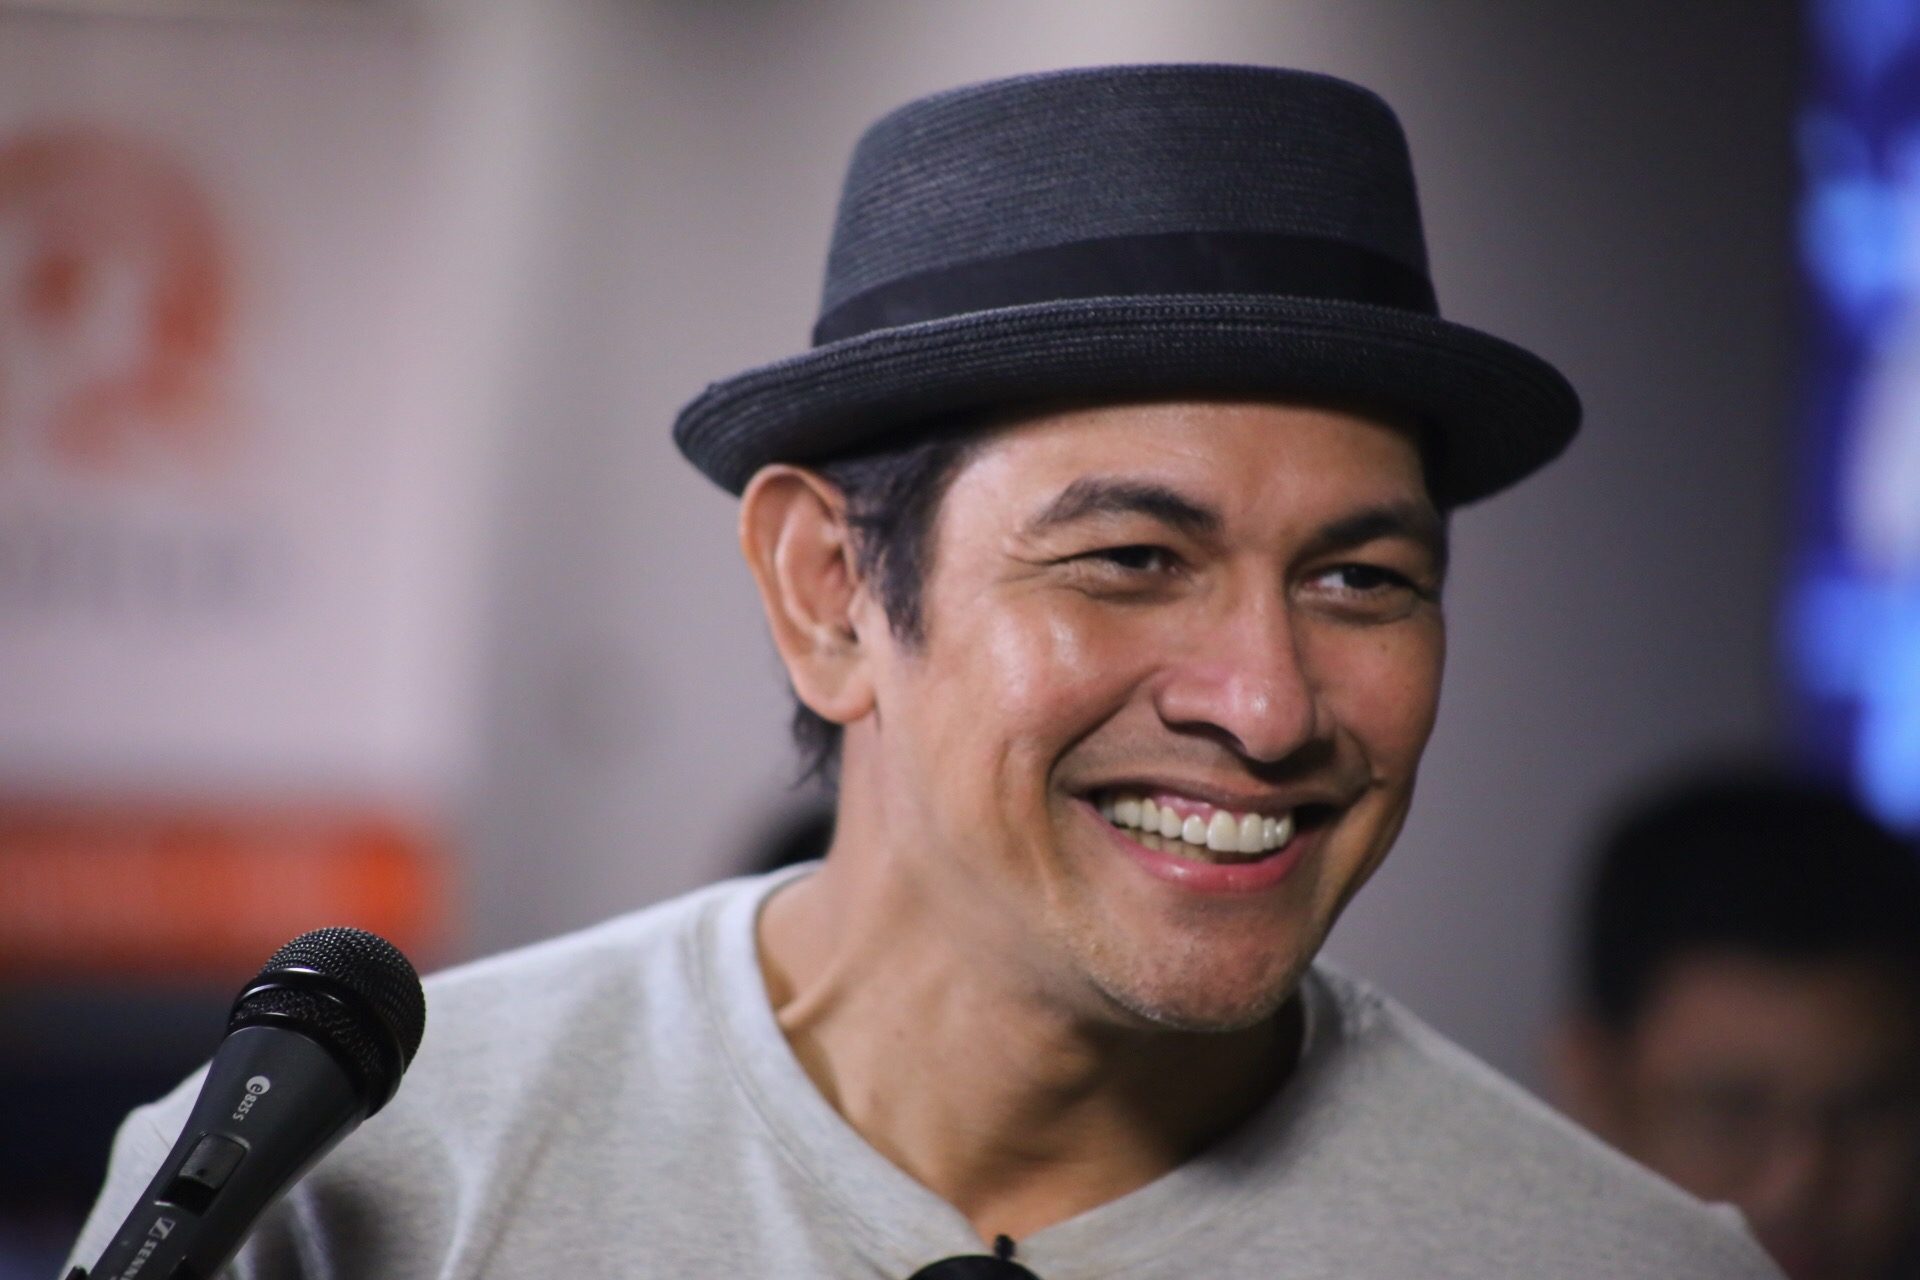 WATCH: Gary Valenciano shares 3 most embarrassing concert moments